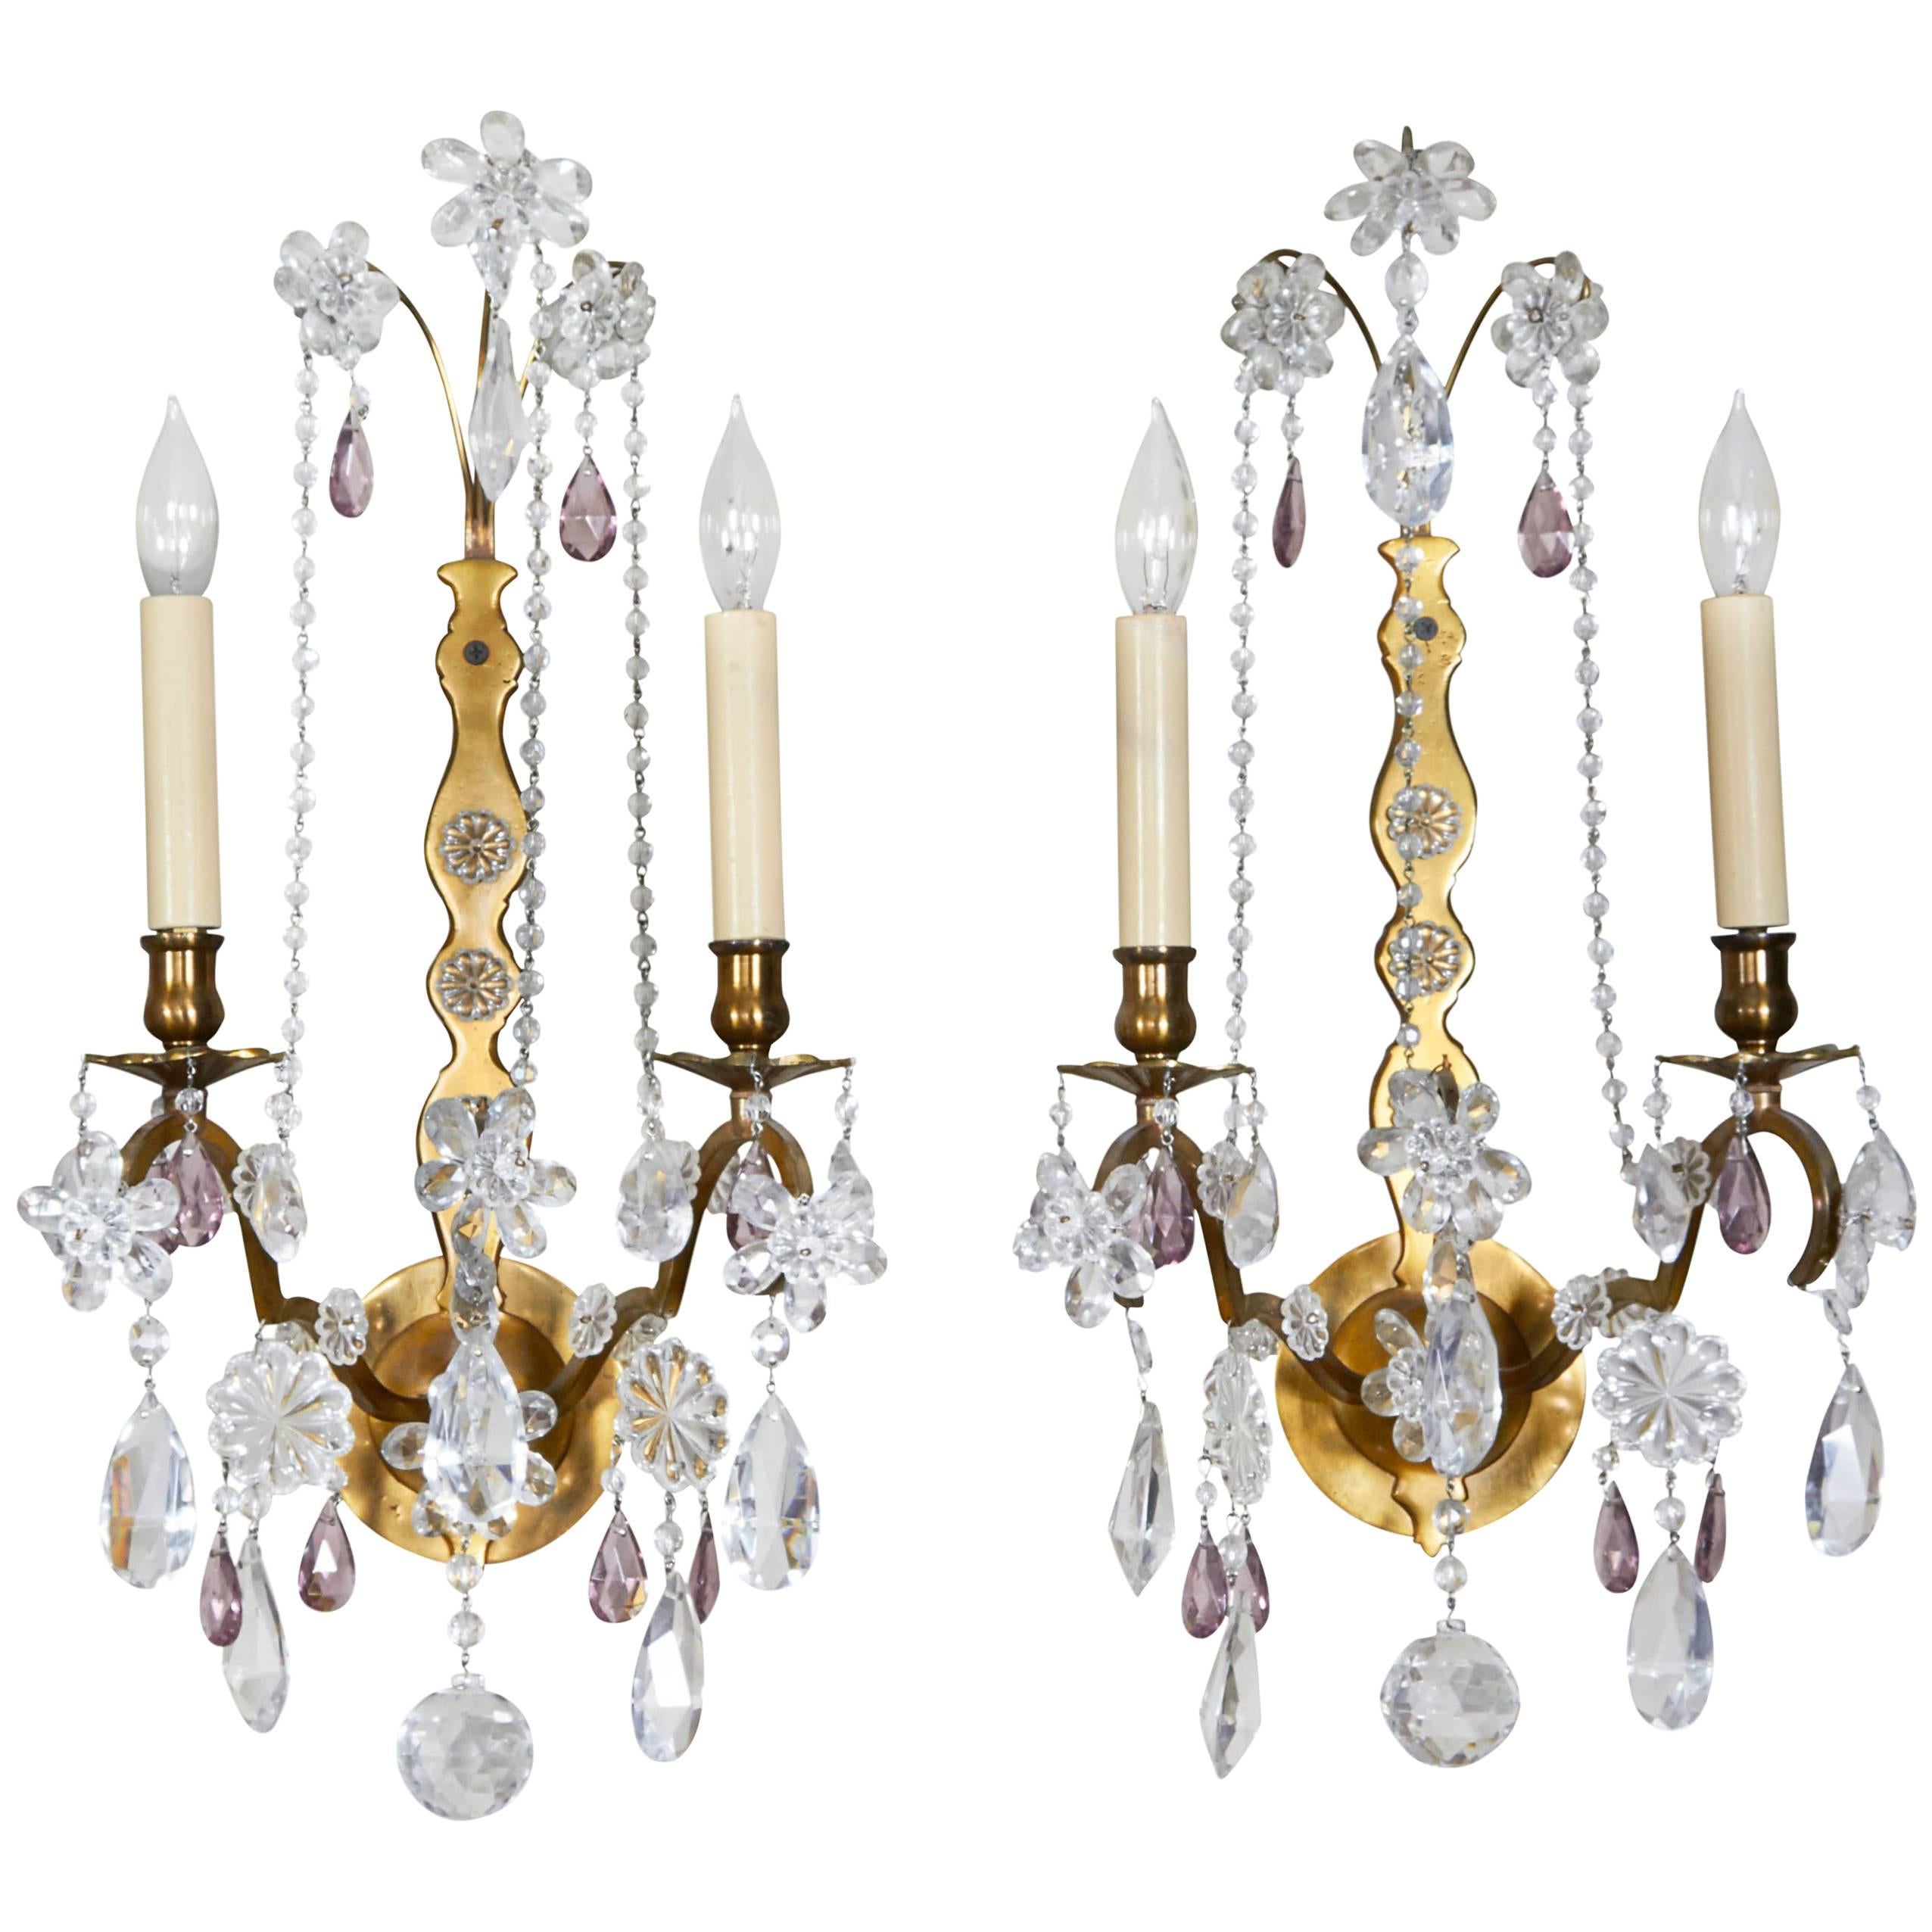 Neoclassical Style Metal Sconces with Crystal Florets